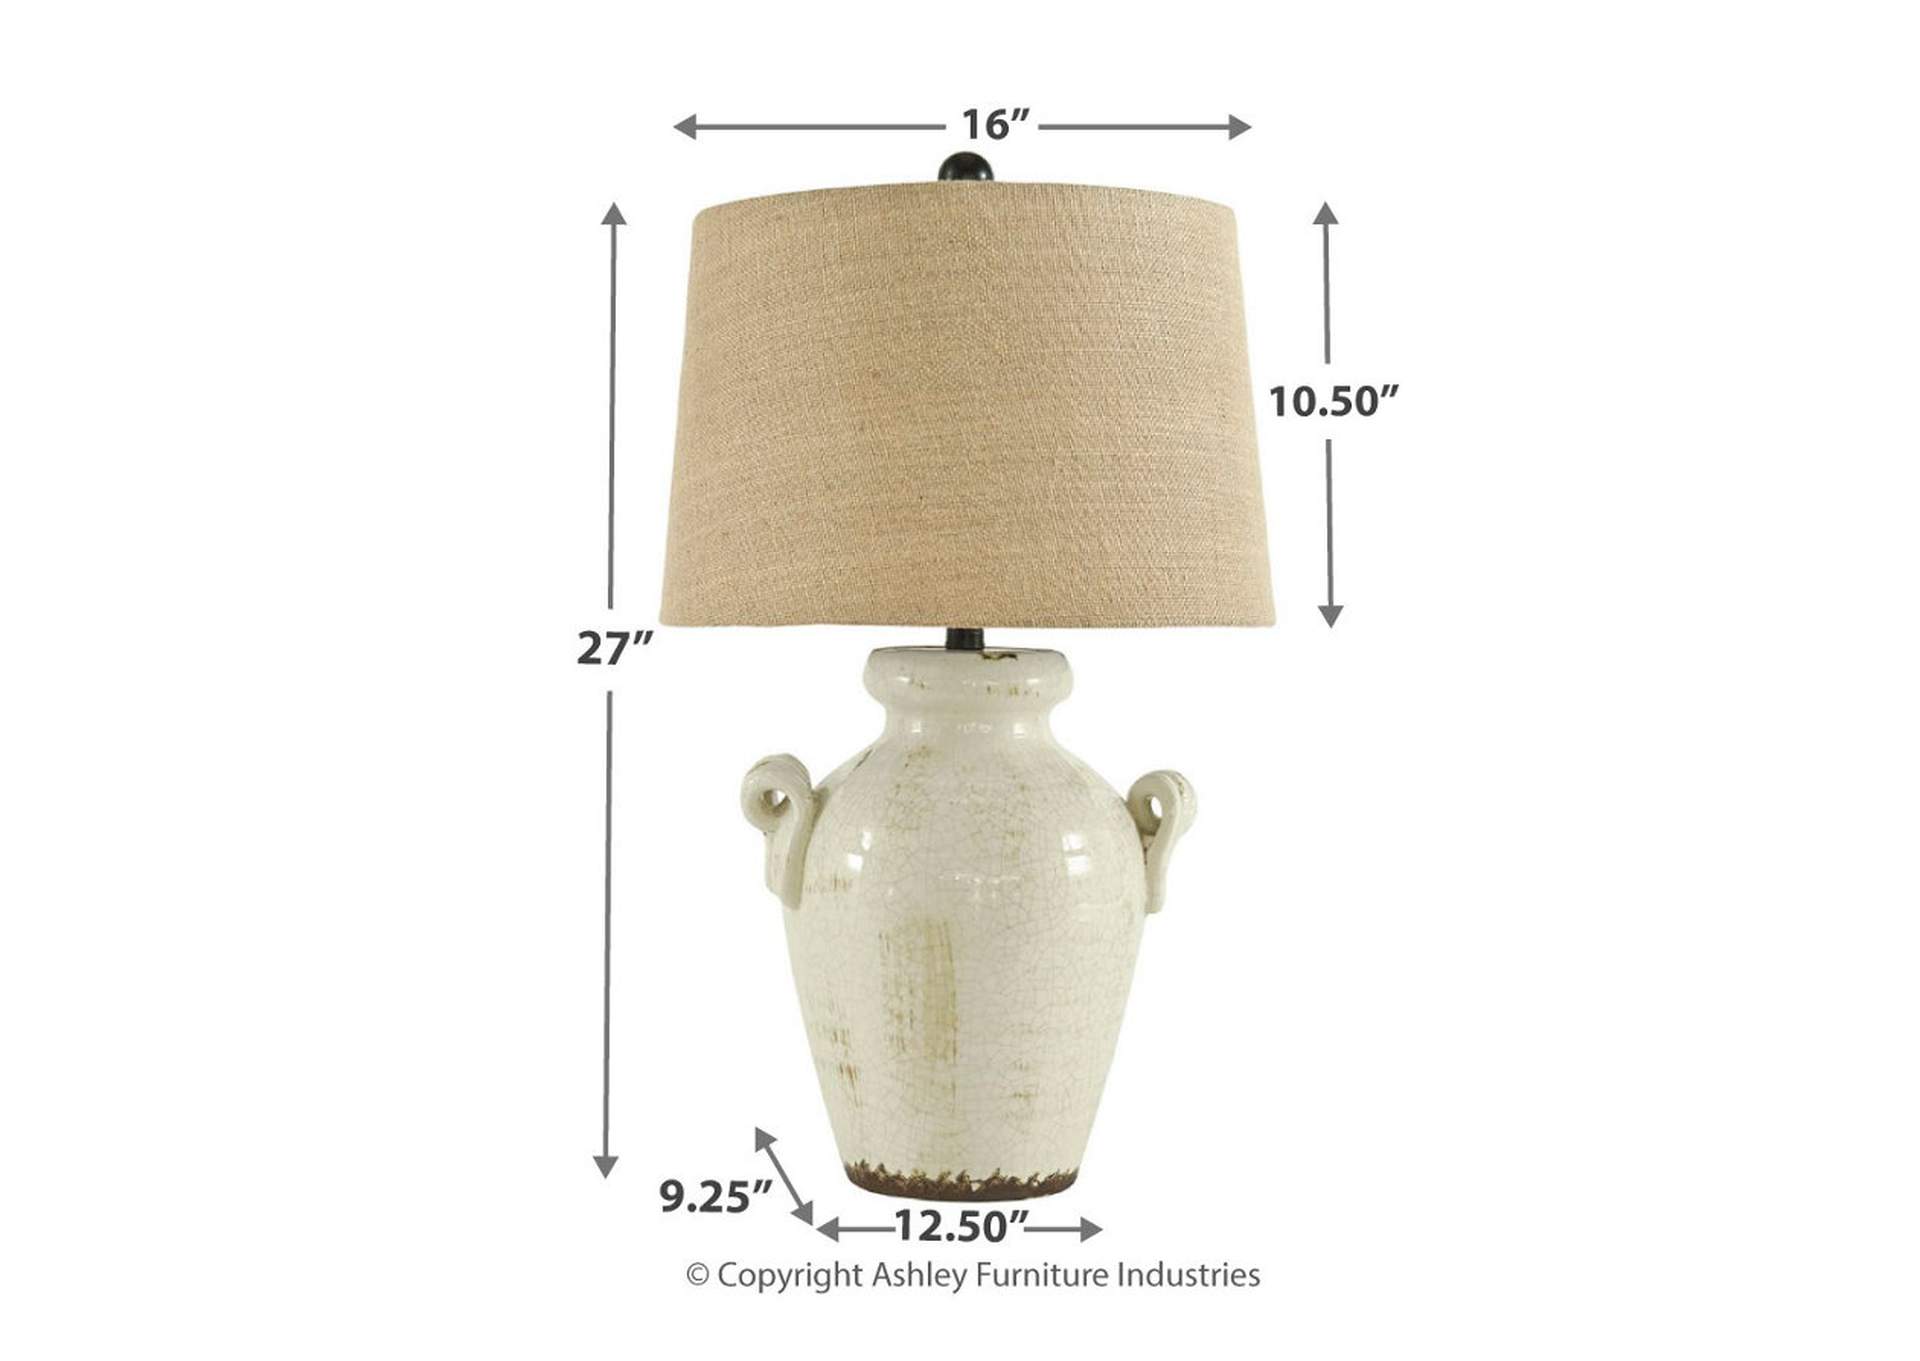 Emelda Table Lamp,Direct To Consumer Express